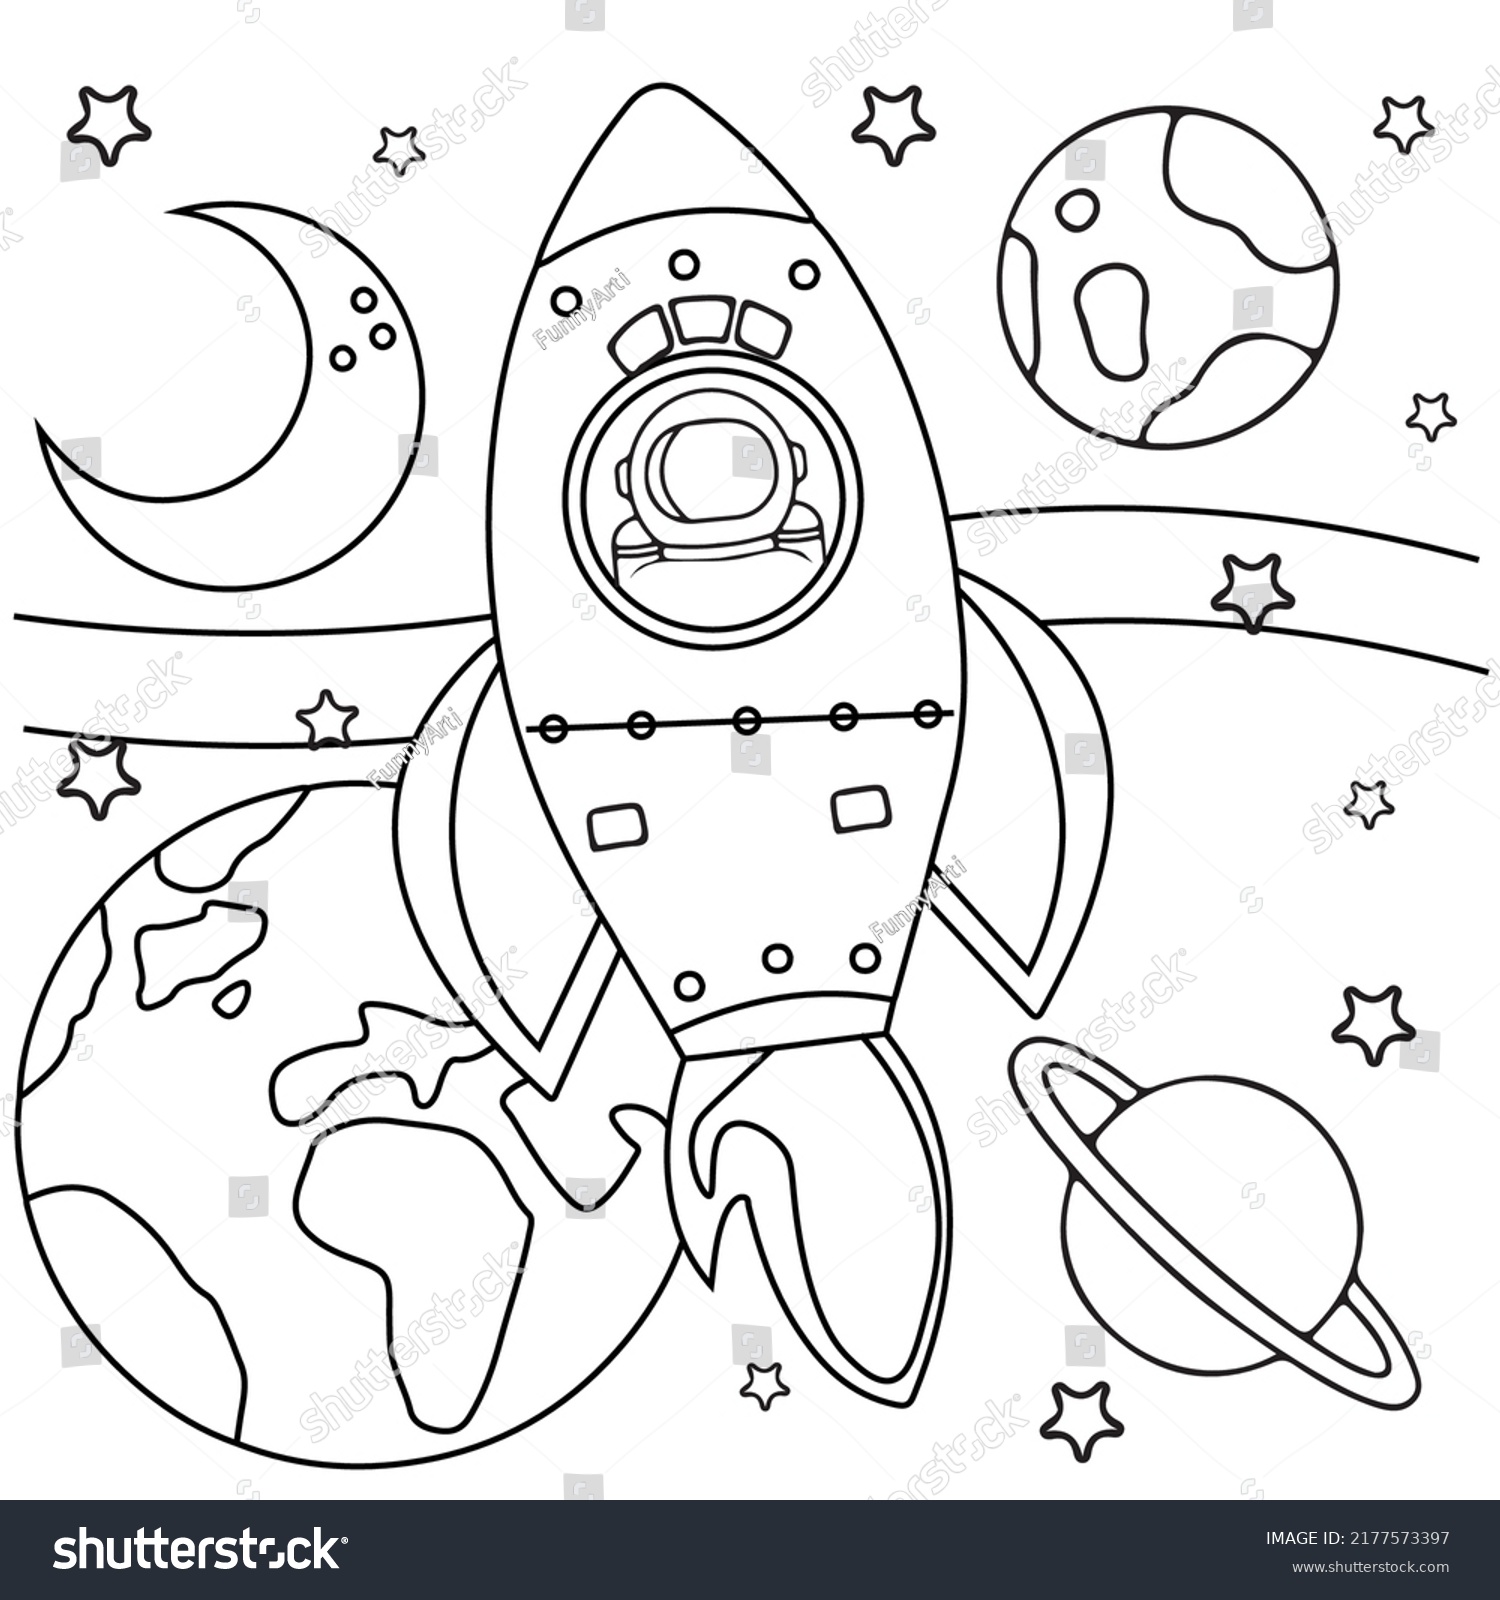 Space coloring worksheet images stock photos d objects vectors